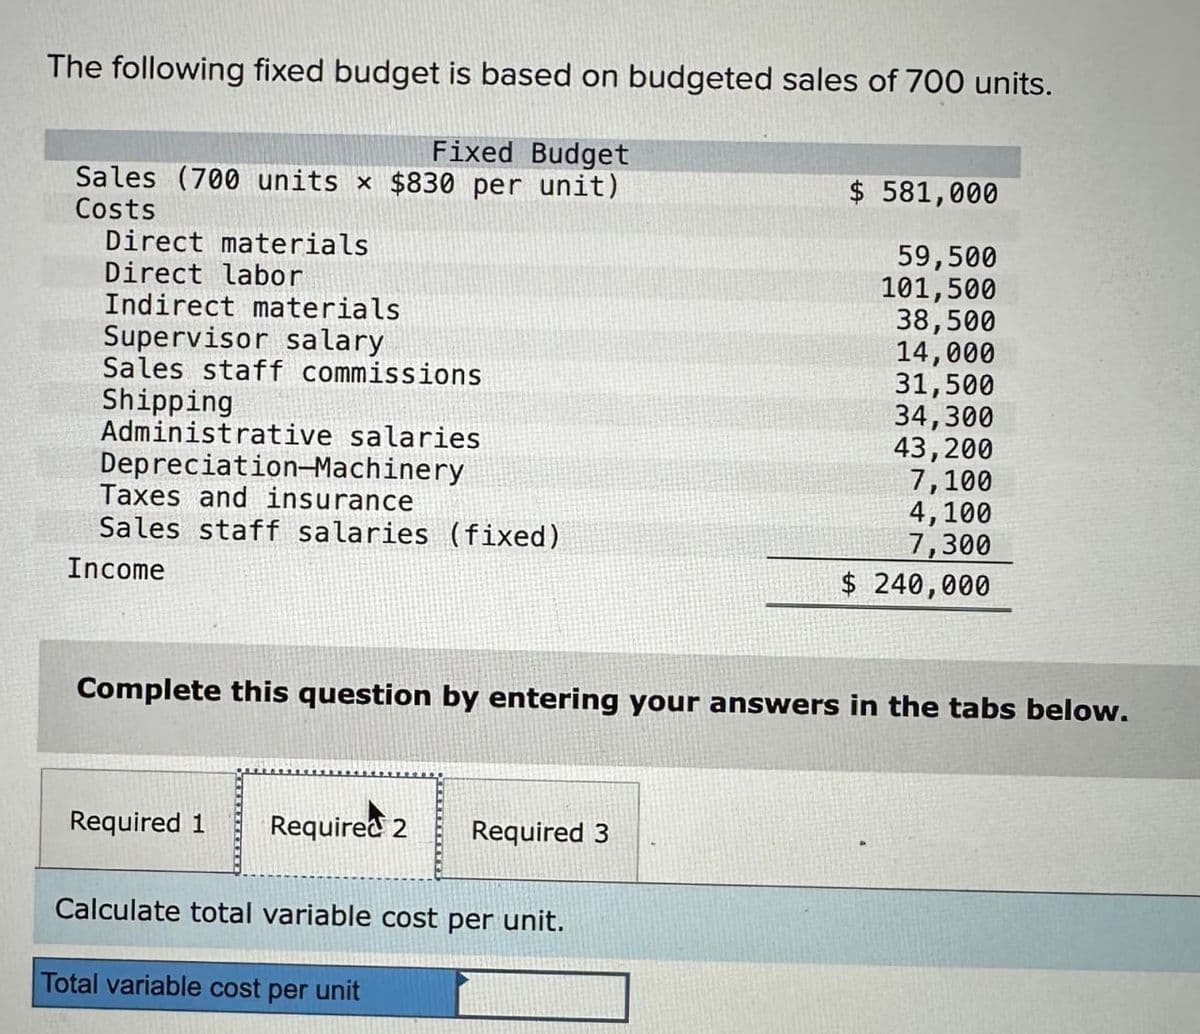 The following fixed budget is based on budgeted sales of 700 units.
Fixed Budget
Sales (700 units x $830 per unit)
Costs
Direct materials
Direct labor
Indirect materials
Supervisor salary
Sales staff commissions
Shipping
Administrative salaries
Depreciation-Machinery
Taxes and insurance
Sales staff salaries (fixed)
Income
Complete this question by entering your answers in the tabs below.
Required 1
Required 2 Required 3
Calculate total variable cost per unit.
$ 581,000
59,500
101,500
38,500
14,000
31,500
34,300
43,200
7,100
4,100
7,300
$ 240,000
Total variable cost per unit